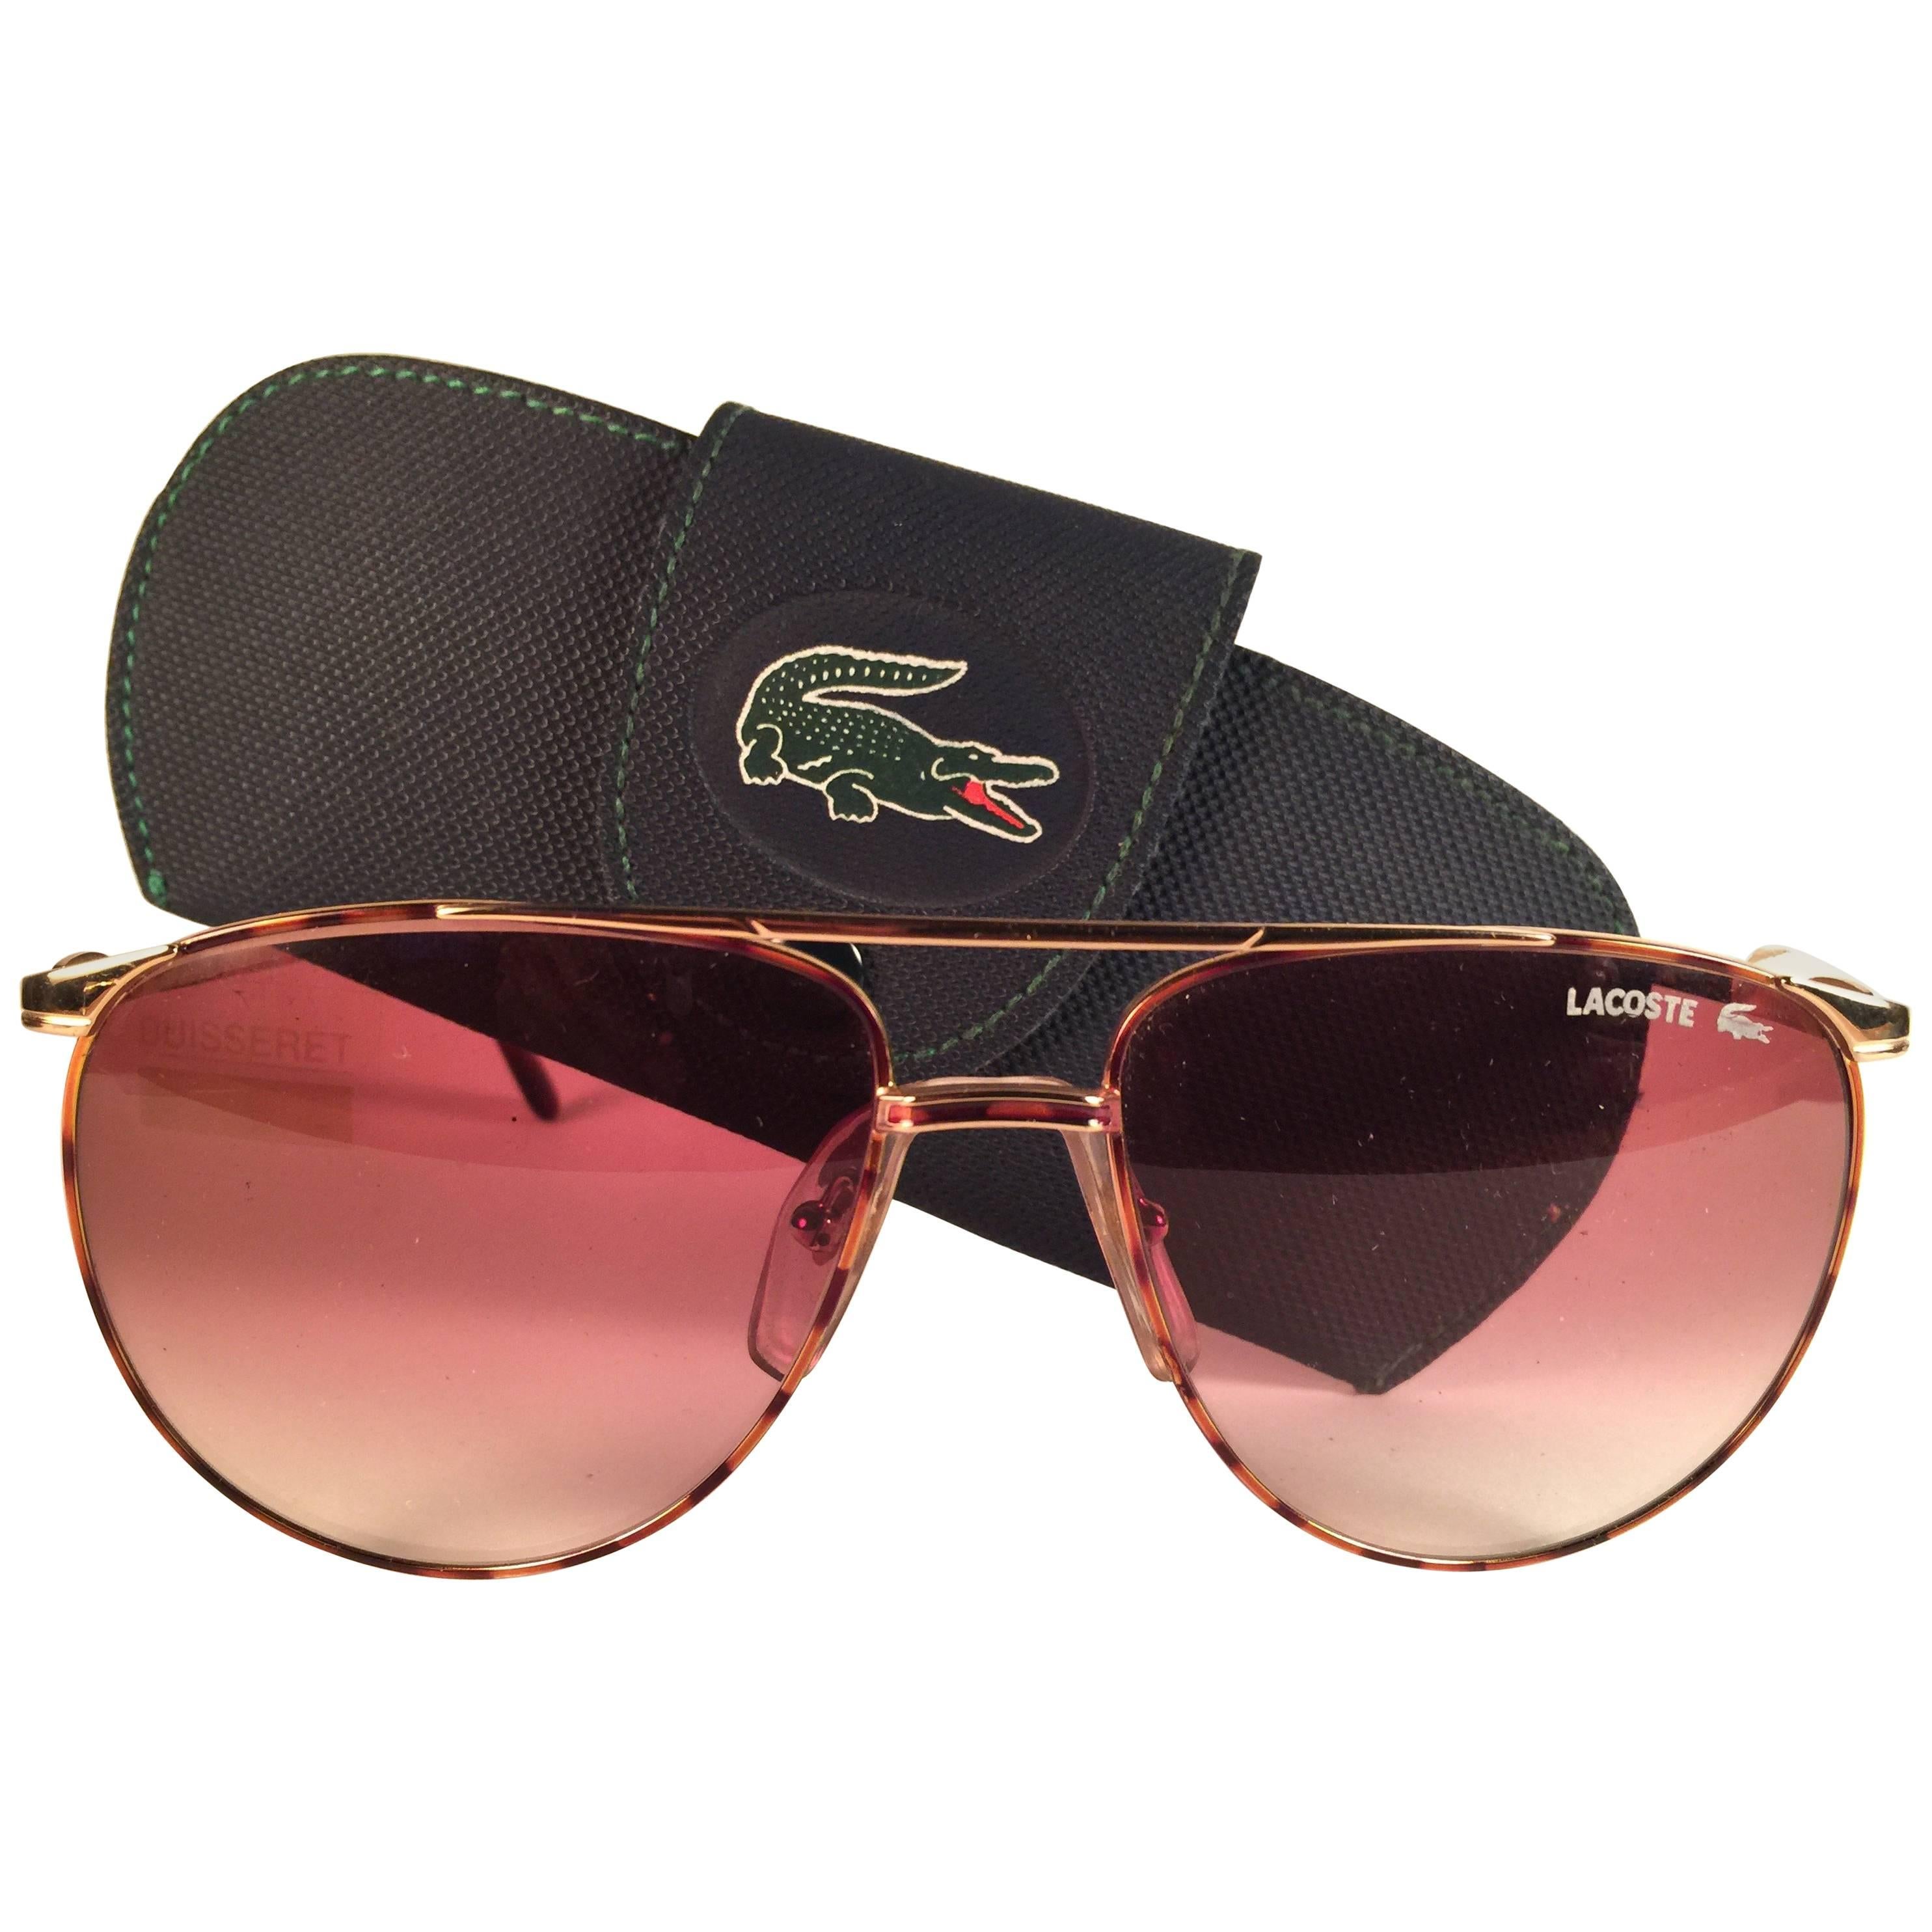 New Vintage Lacoste Tortoise & Gold 1980's Sunglasses Made in France 